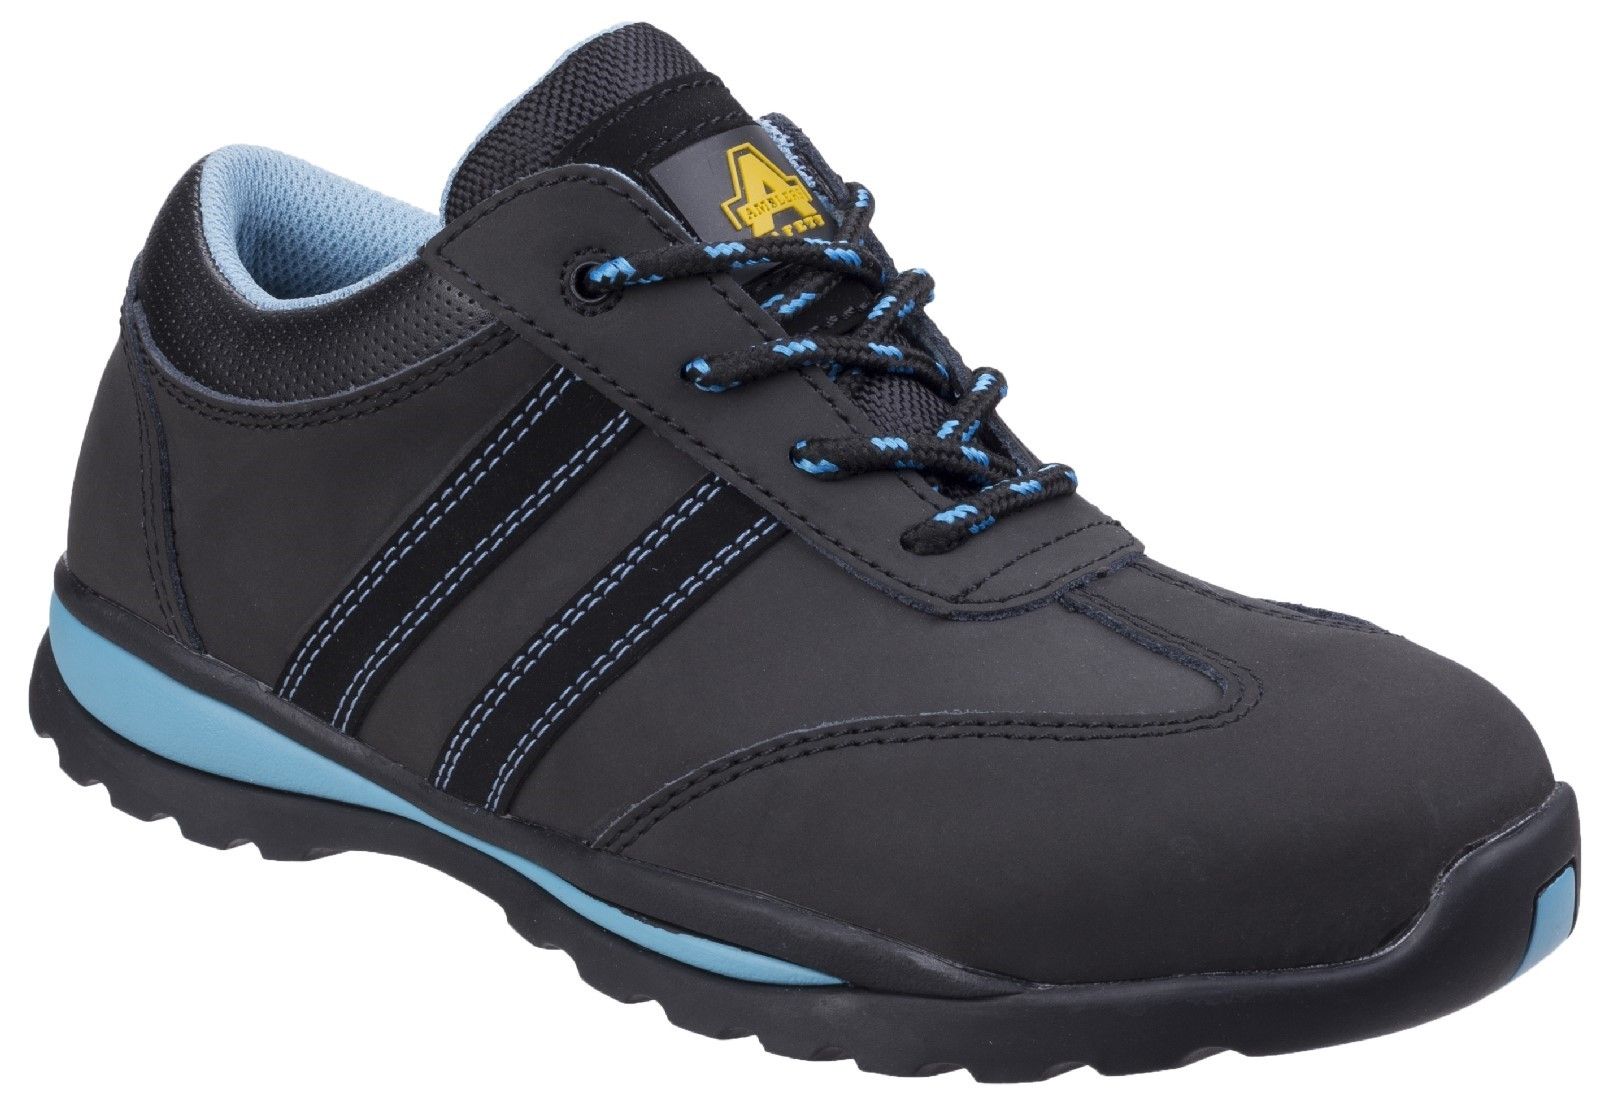 Women's modern lightweight safety trainer crafted with Nubuck Leather, PU padded collar, anti-static and durable full Rubber outsole.Nubuck Leather upper. 
Moisture wicking breathable mesh lining. 
200 Joules Steel toe cap. 
Penetration resistance Steel midsole to 1100 Newtons. 
Anti-static.